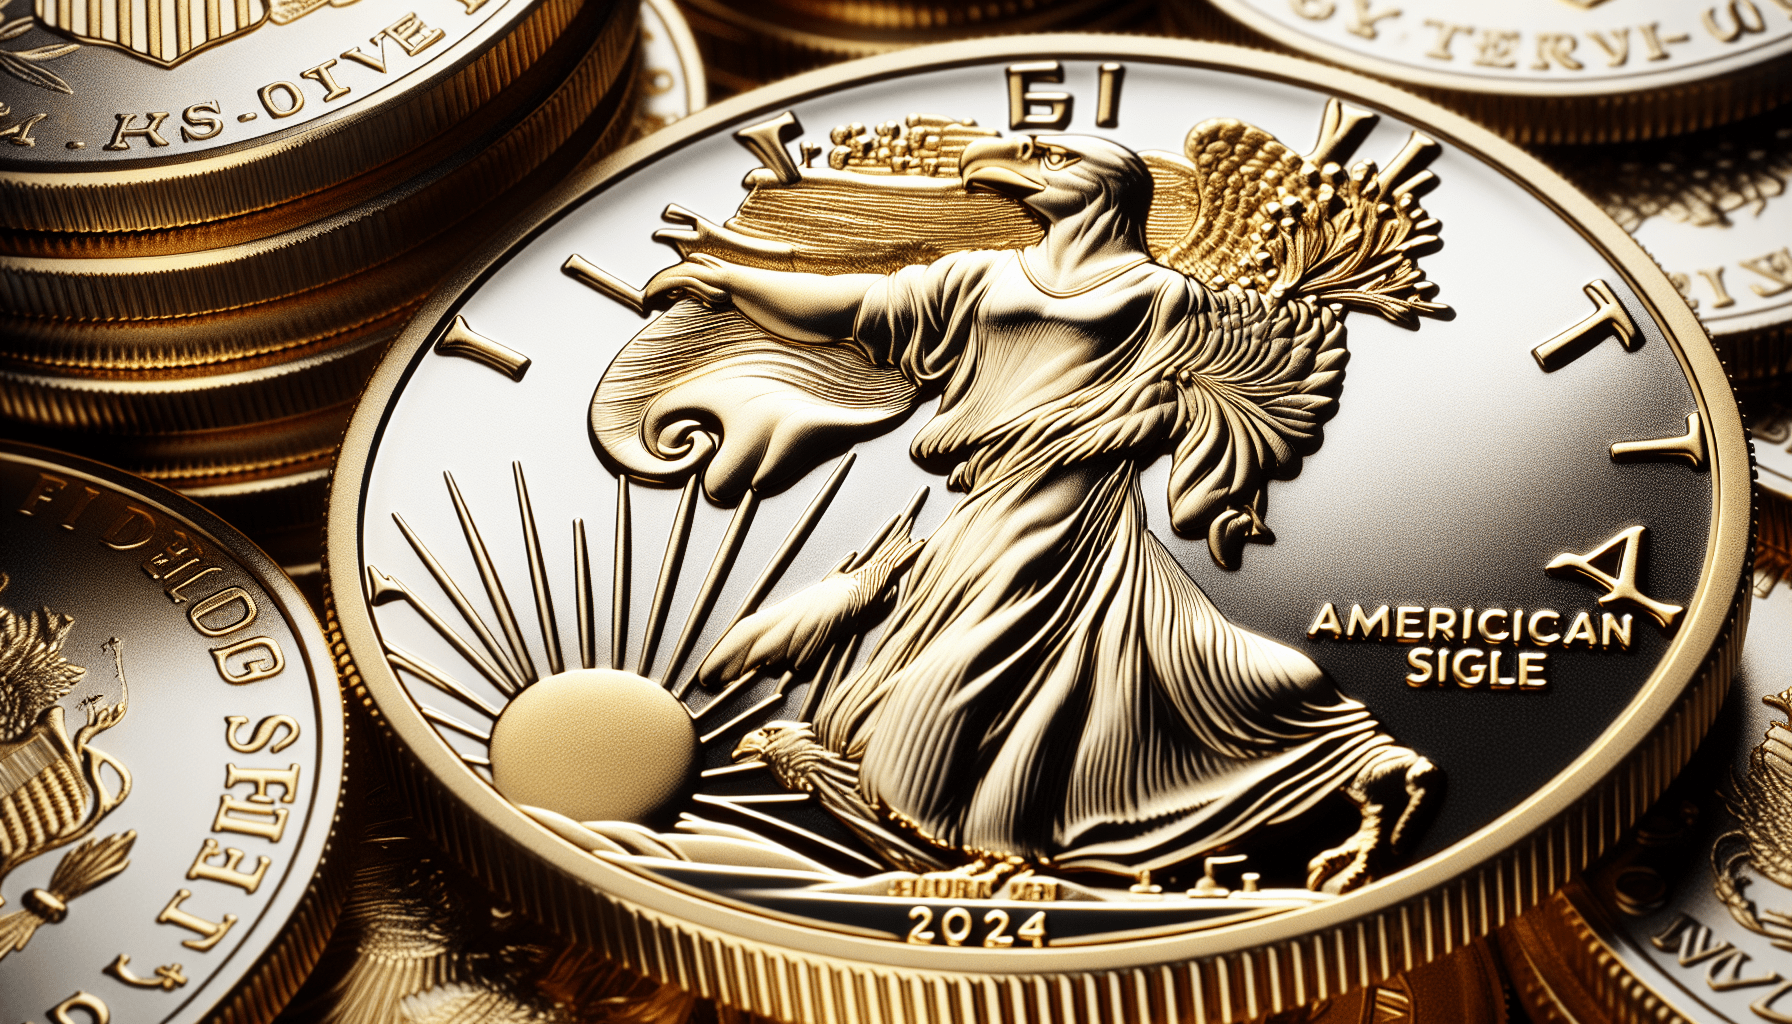 24K Gold Gilded American Silver Eagle Coin Review